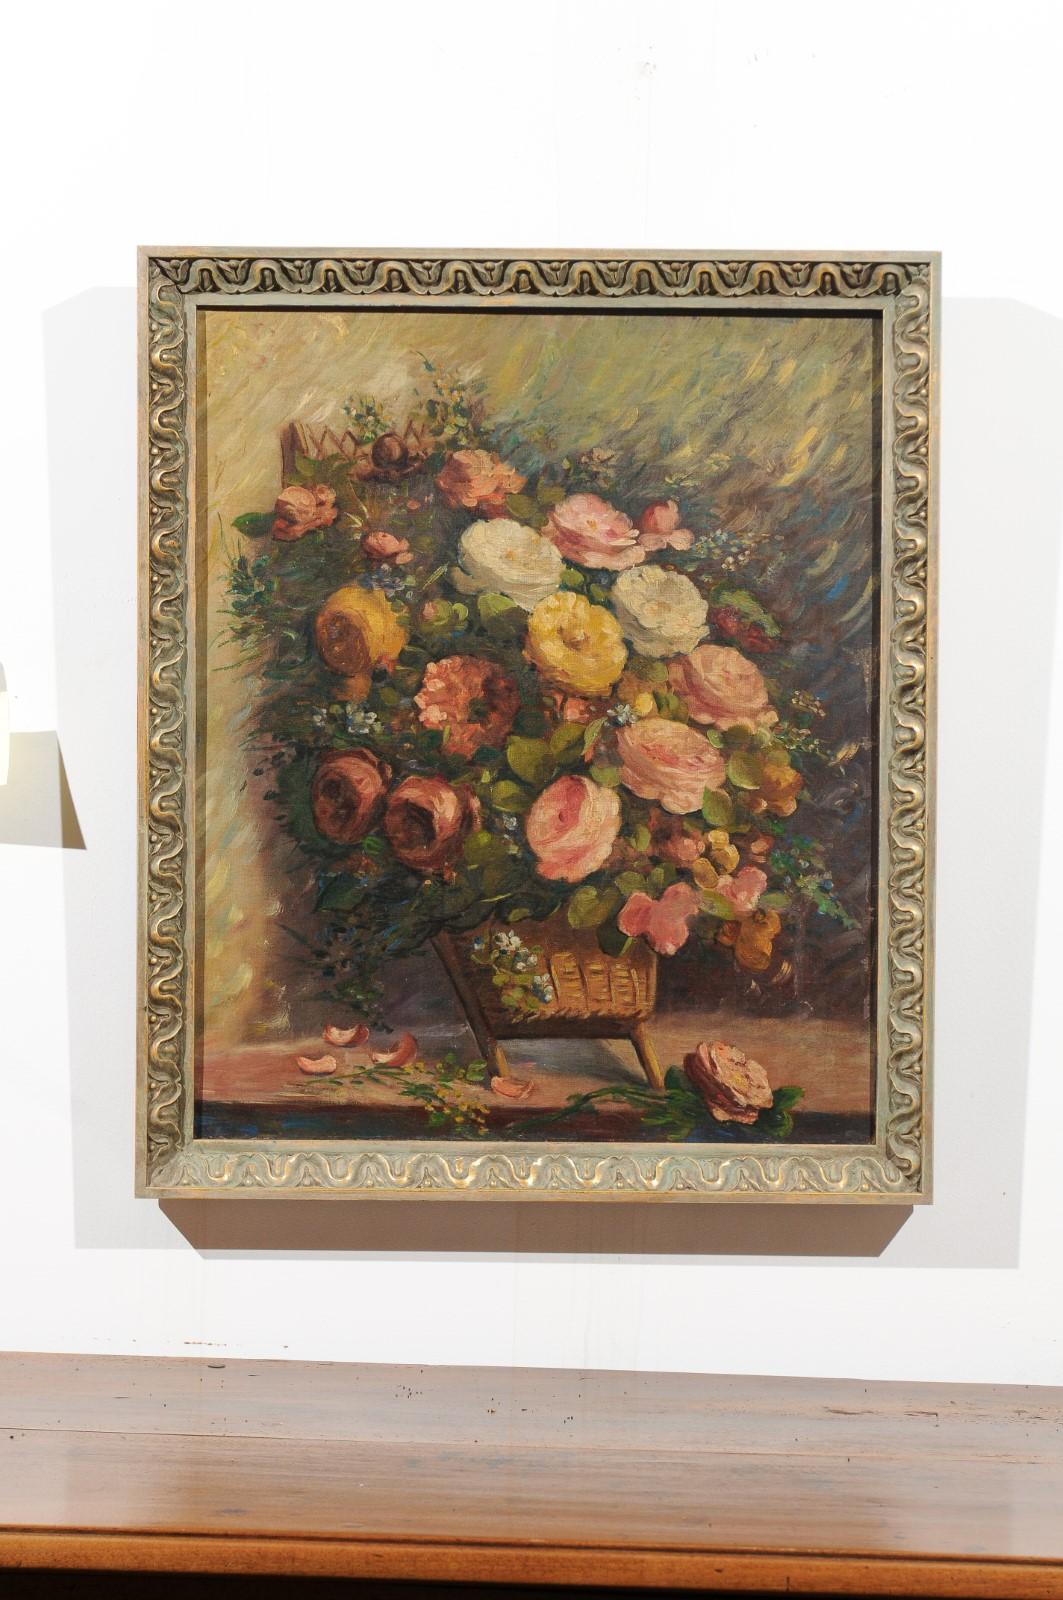 A French framed oil on canvas still-life painting from the 19th century, depicting roses in a basket. Born in France during the 19th century, this elegant oil on canvas depicts a luscious bouquet of pink, white and yellow roses overflowing a small